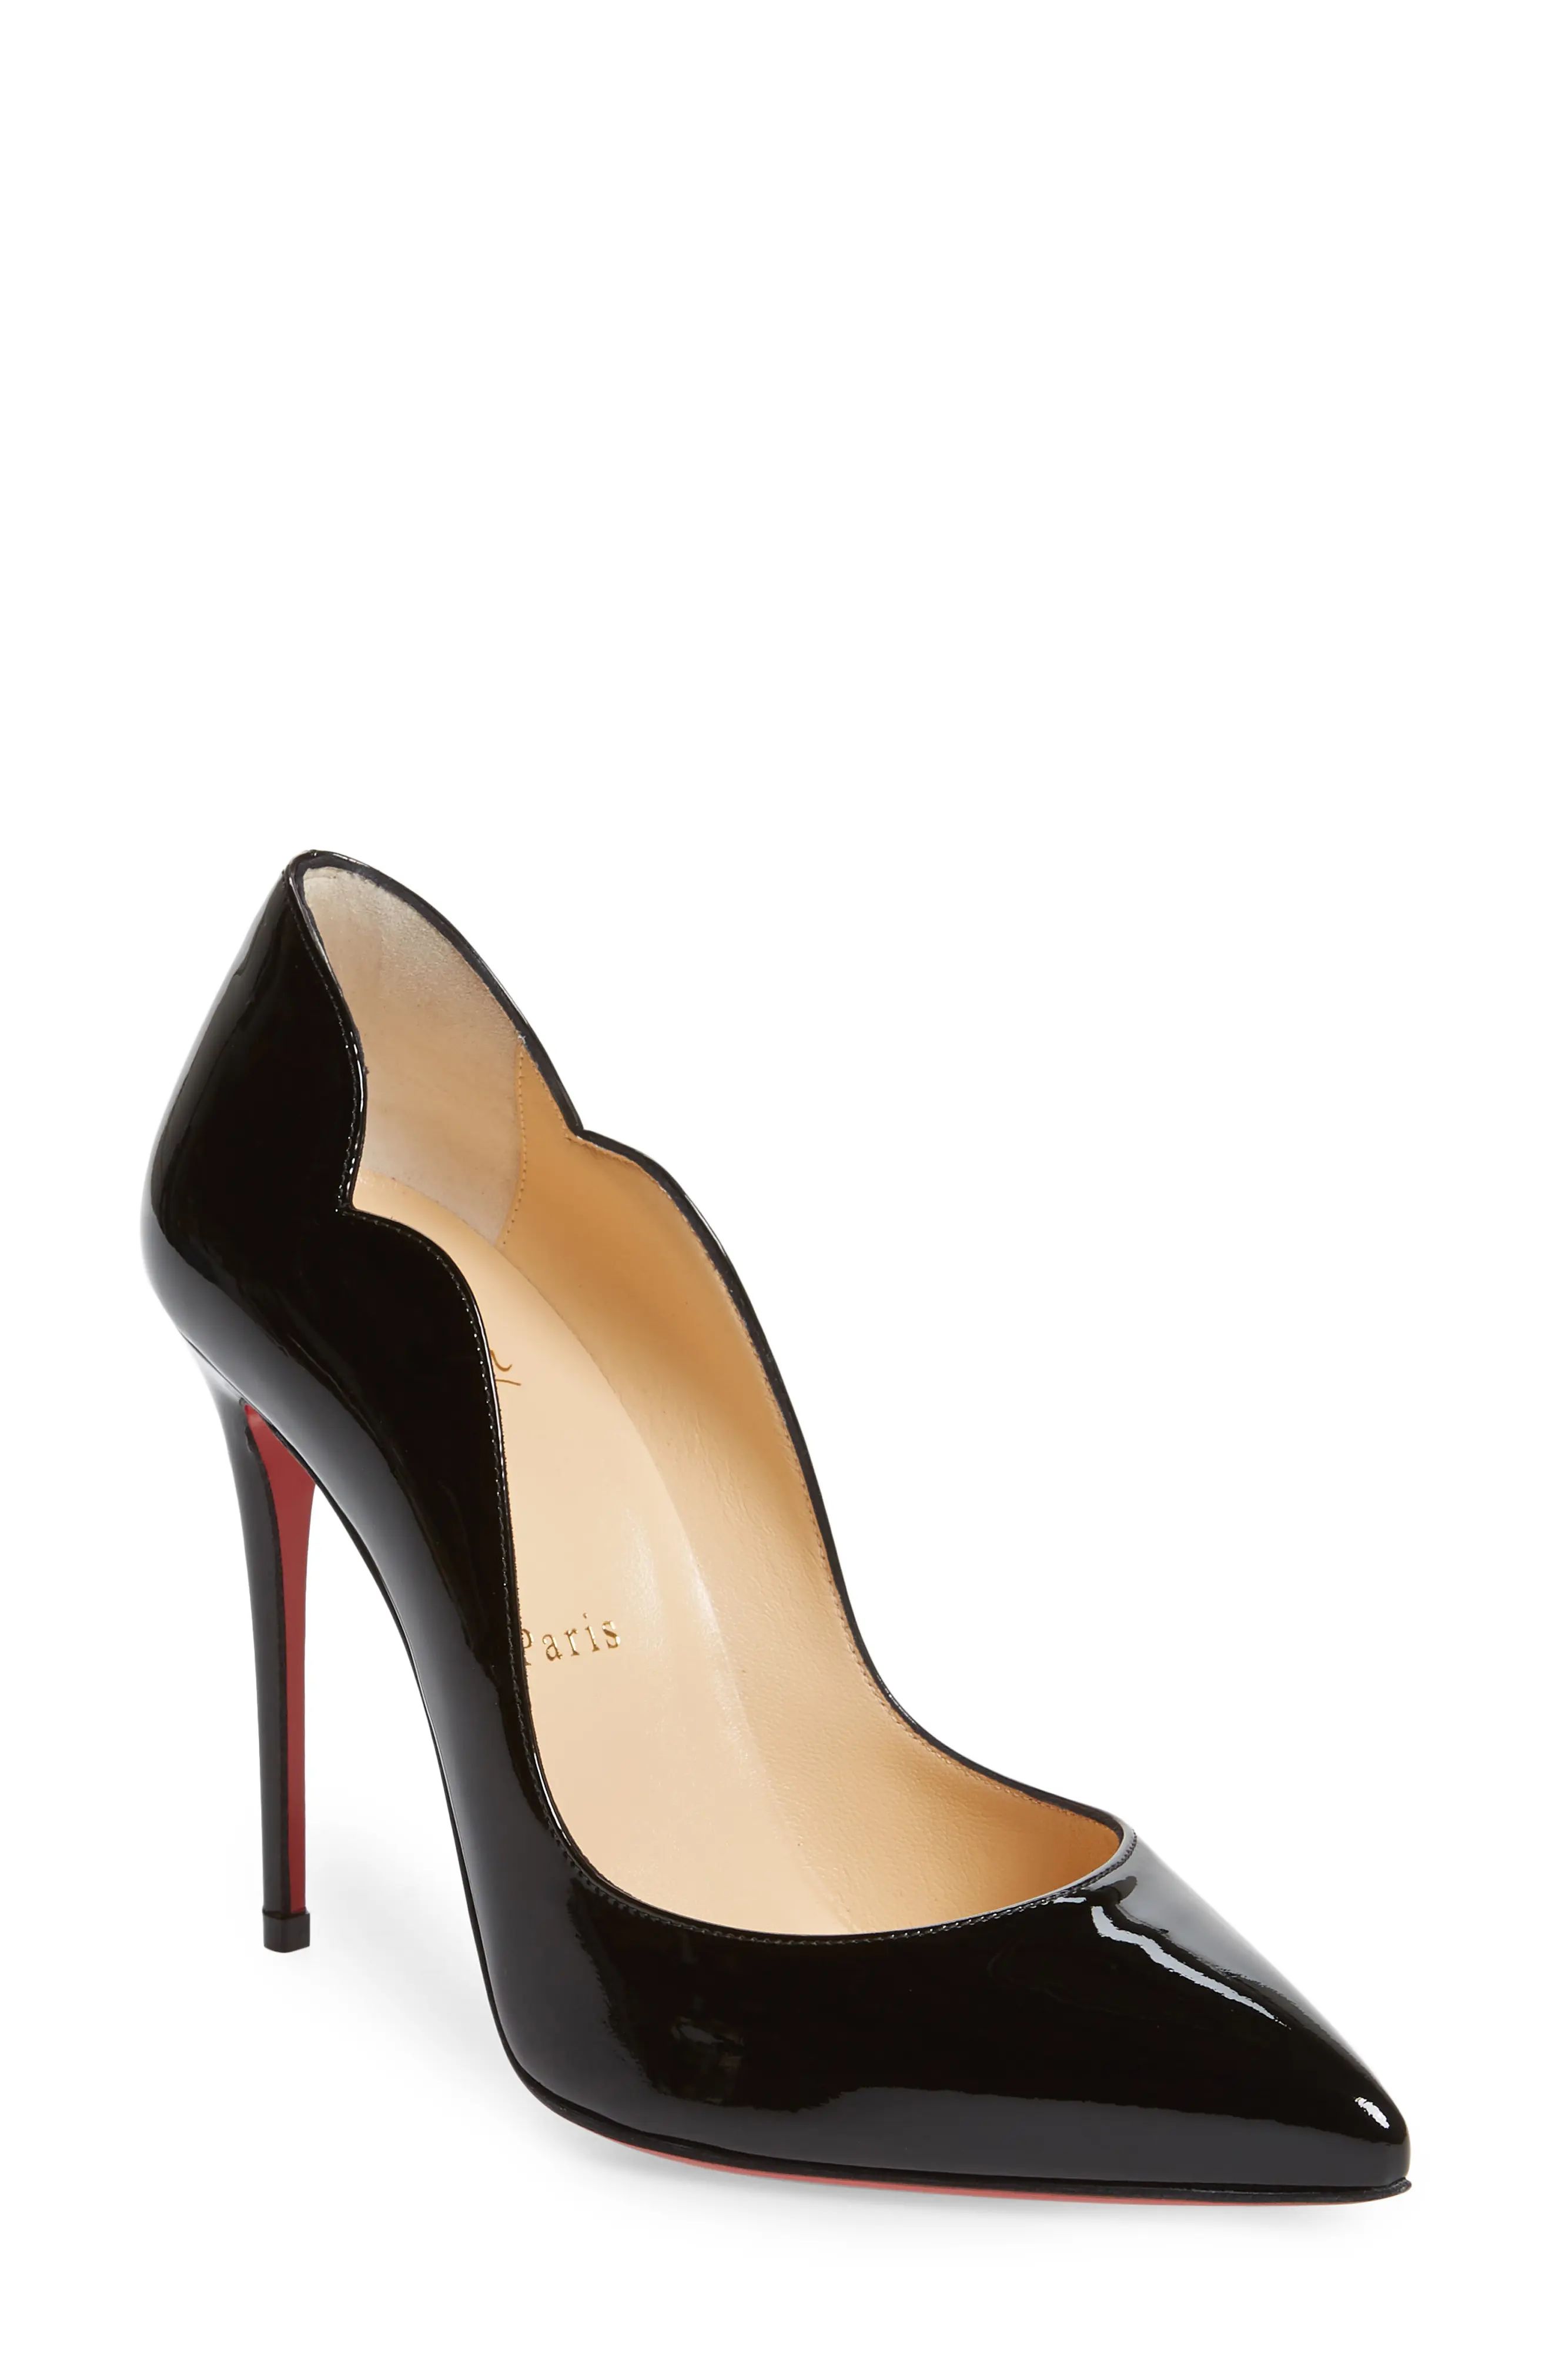 Christian Louboutin Hot Chick Scallop Pointed Toe Pump, Size 8Us in Black Patent at Nordstrom | Nordstrom